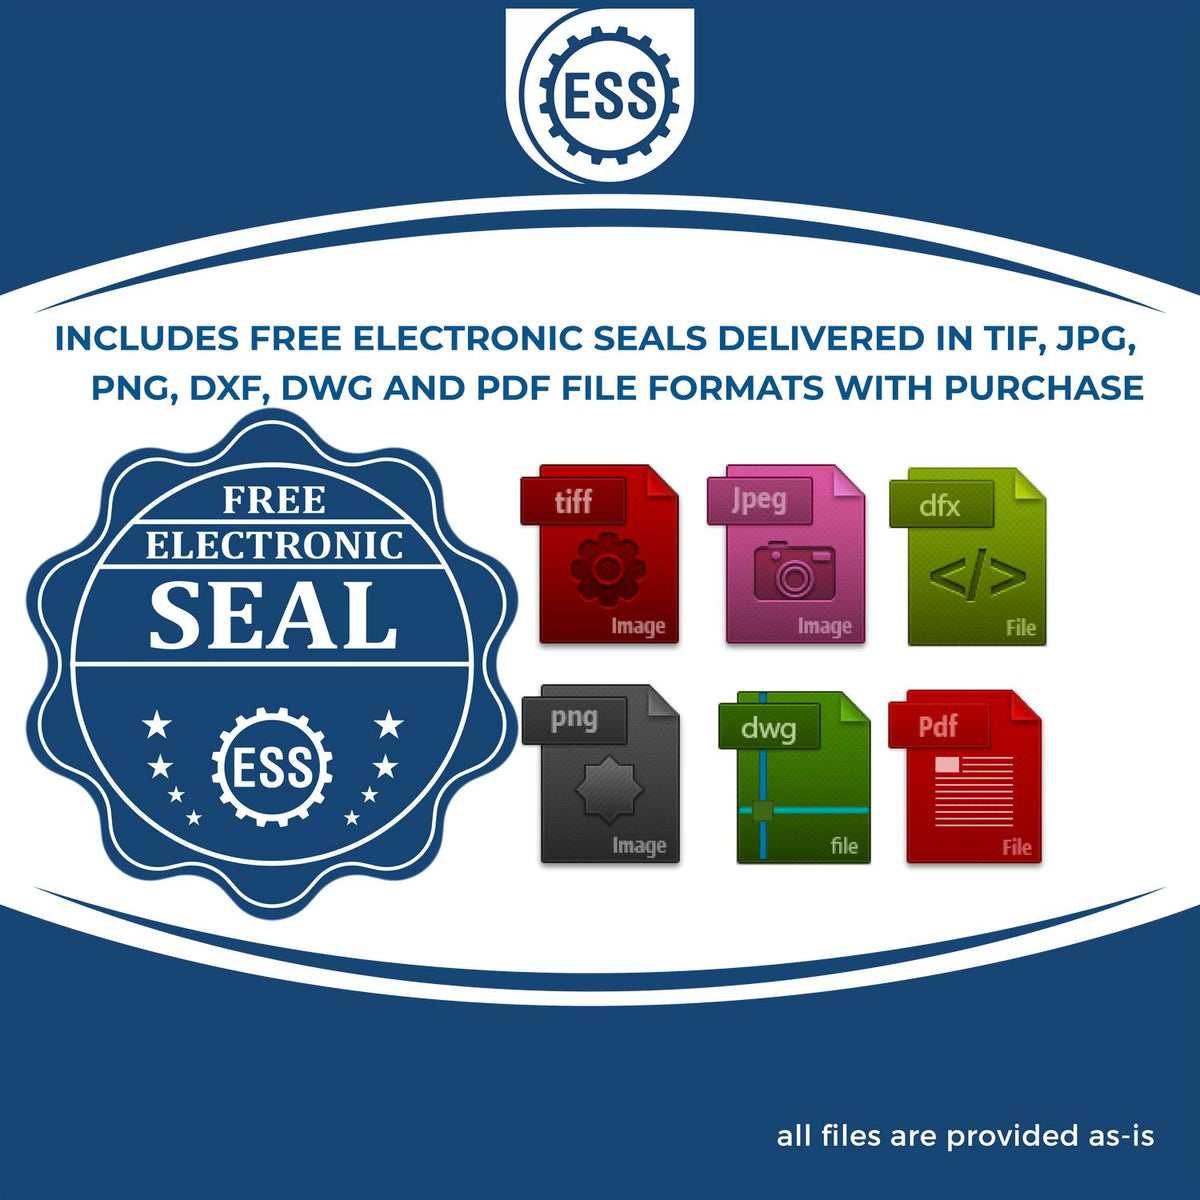 An infographic for the free electronic seal for the MaxLight Premium Pre-Inked Florida Rectangular Notarial Stamp illustrating the different file type icons such as DXF, DWG, TIF, JPG and PNG.